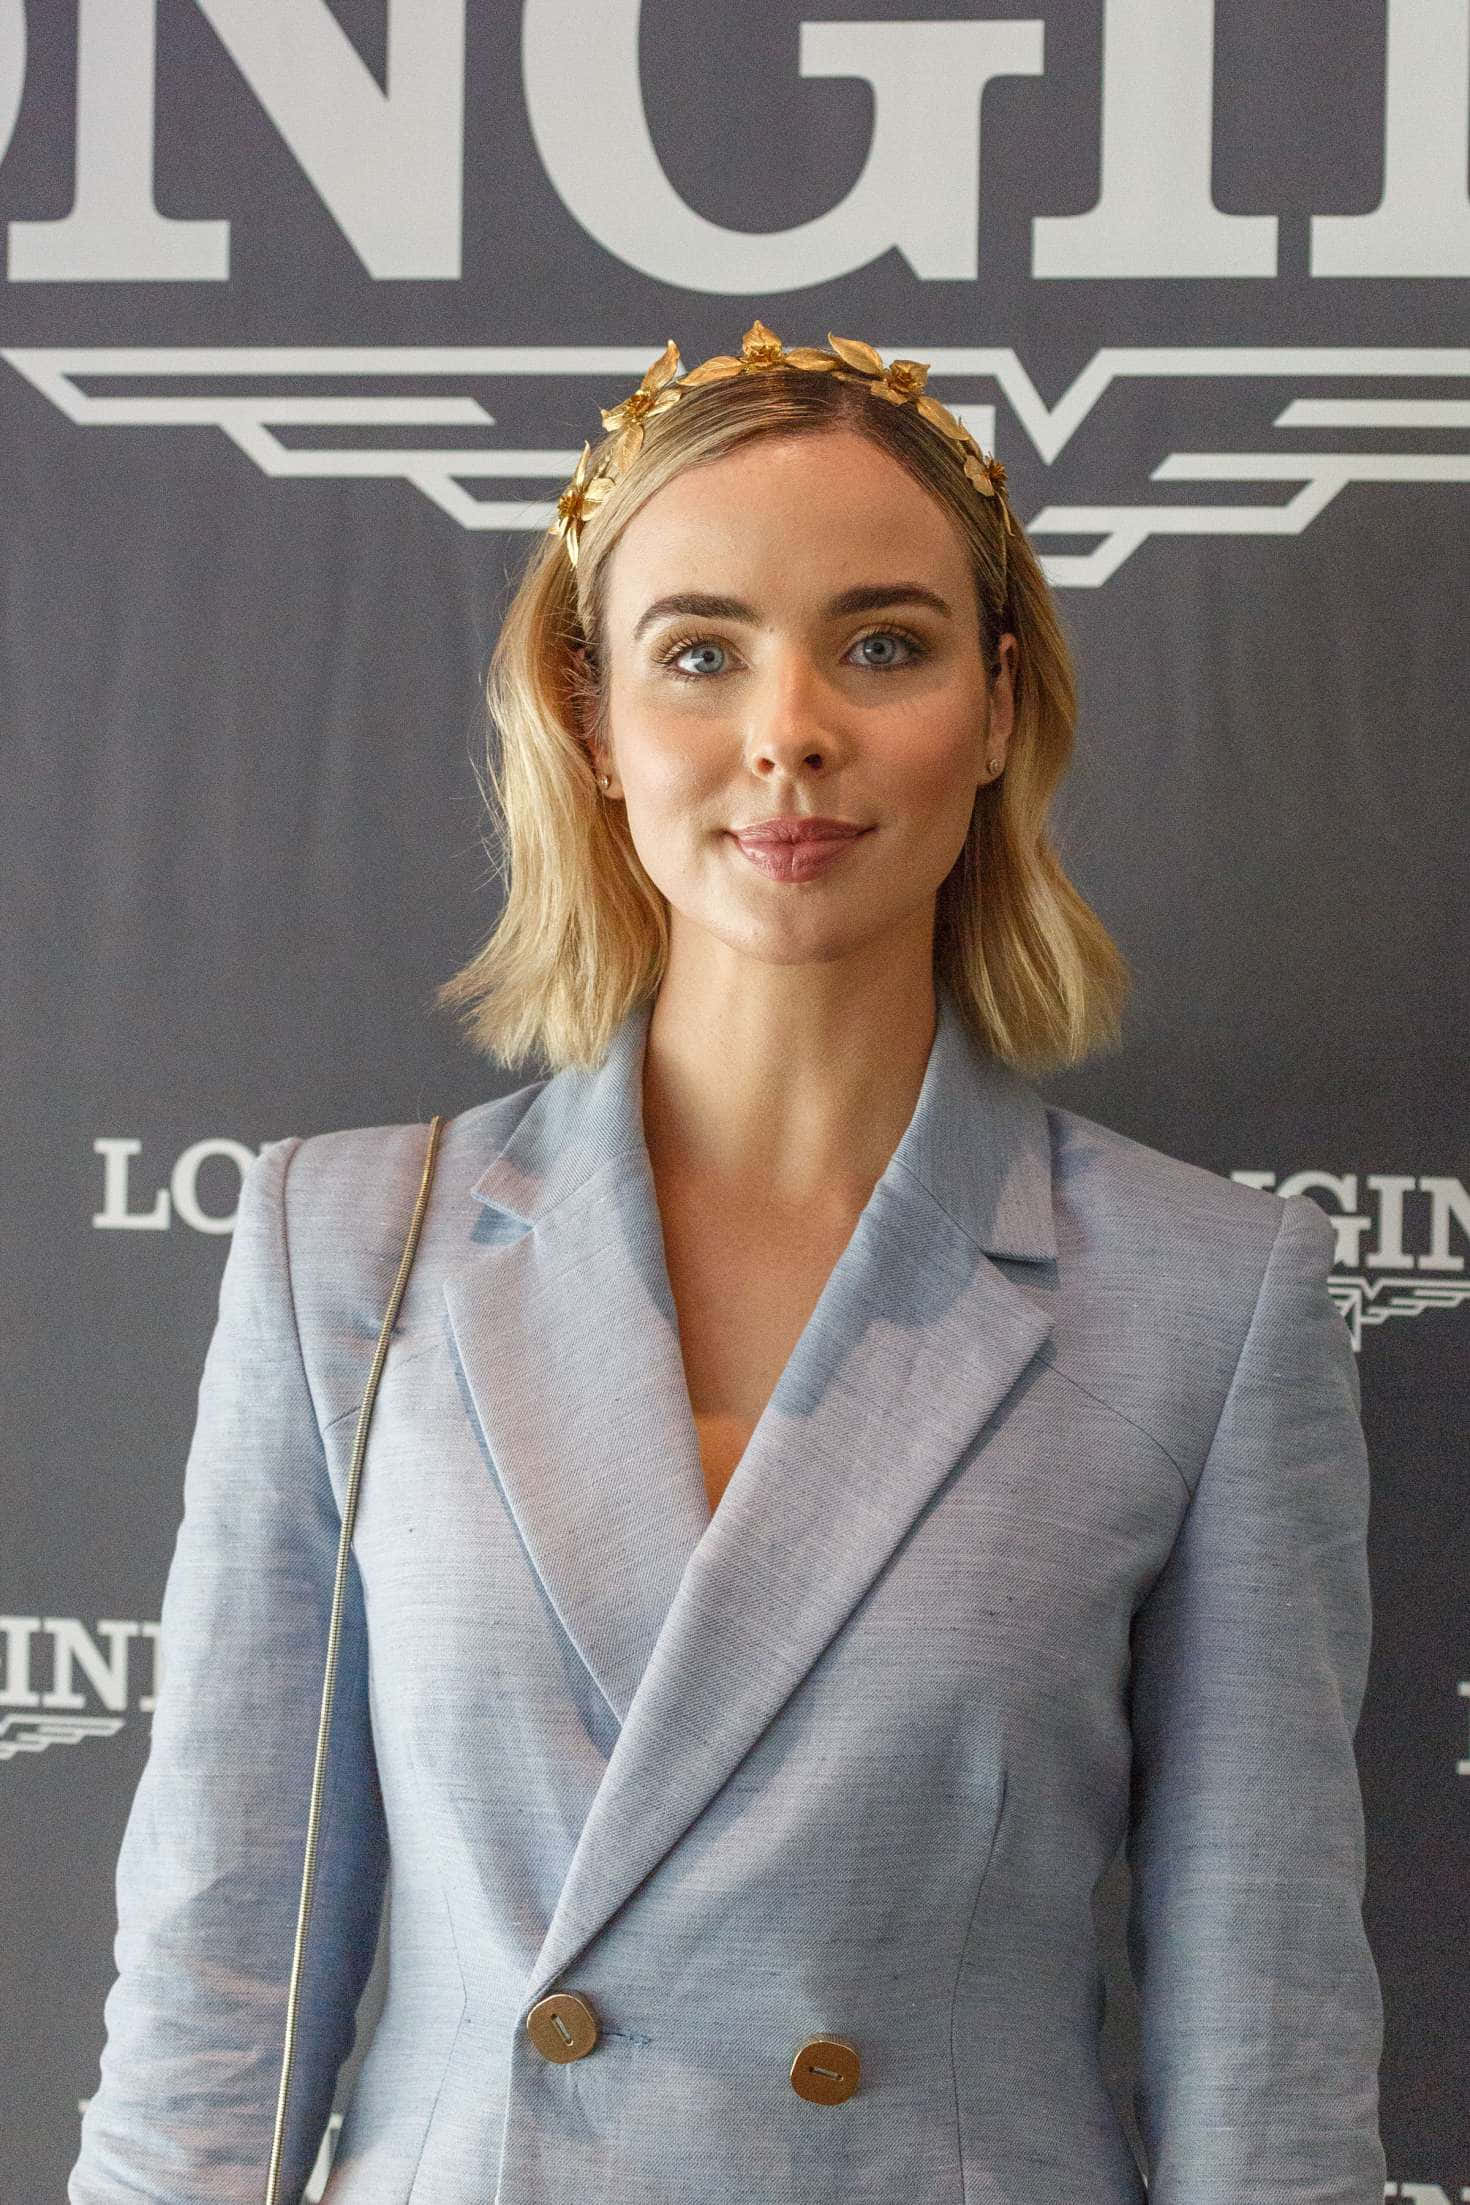 Caption: Ashleigh Brewer Stunning In Red Carpet Look Wallpaper